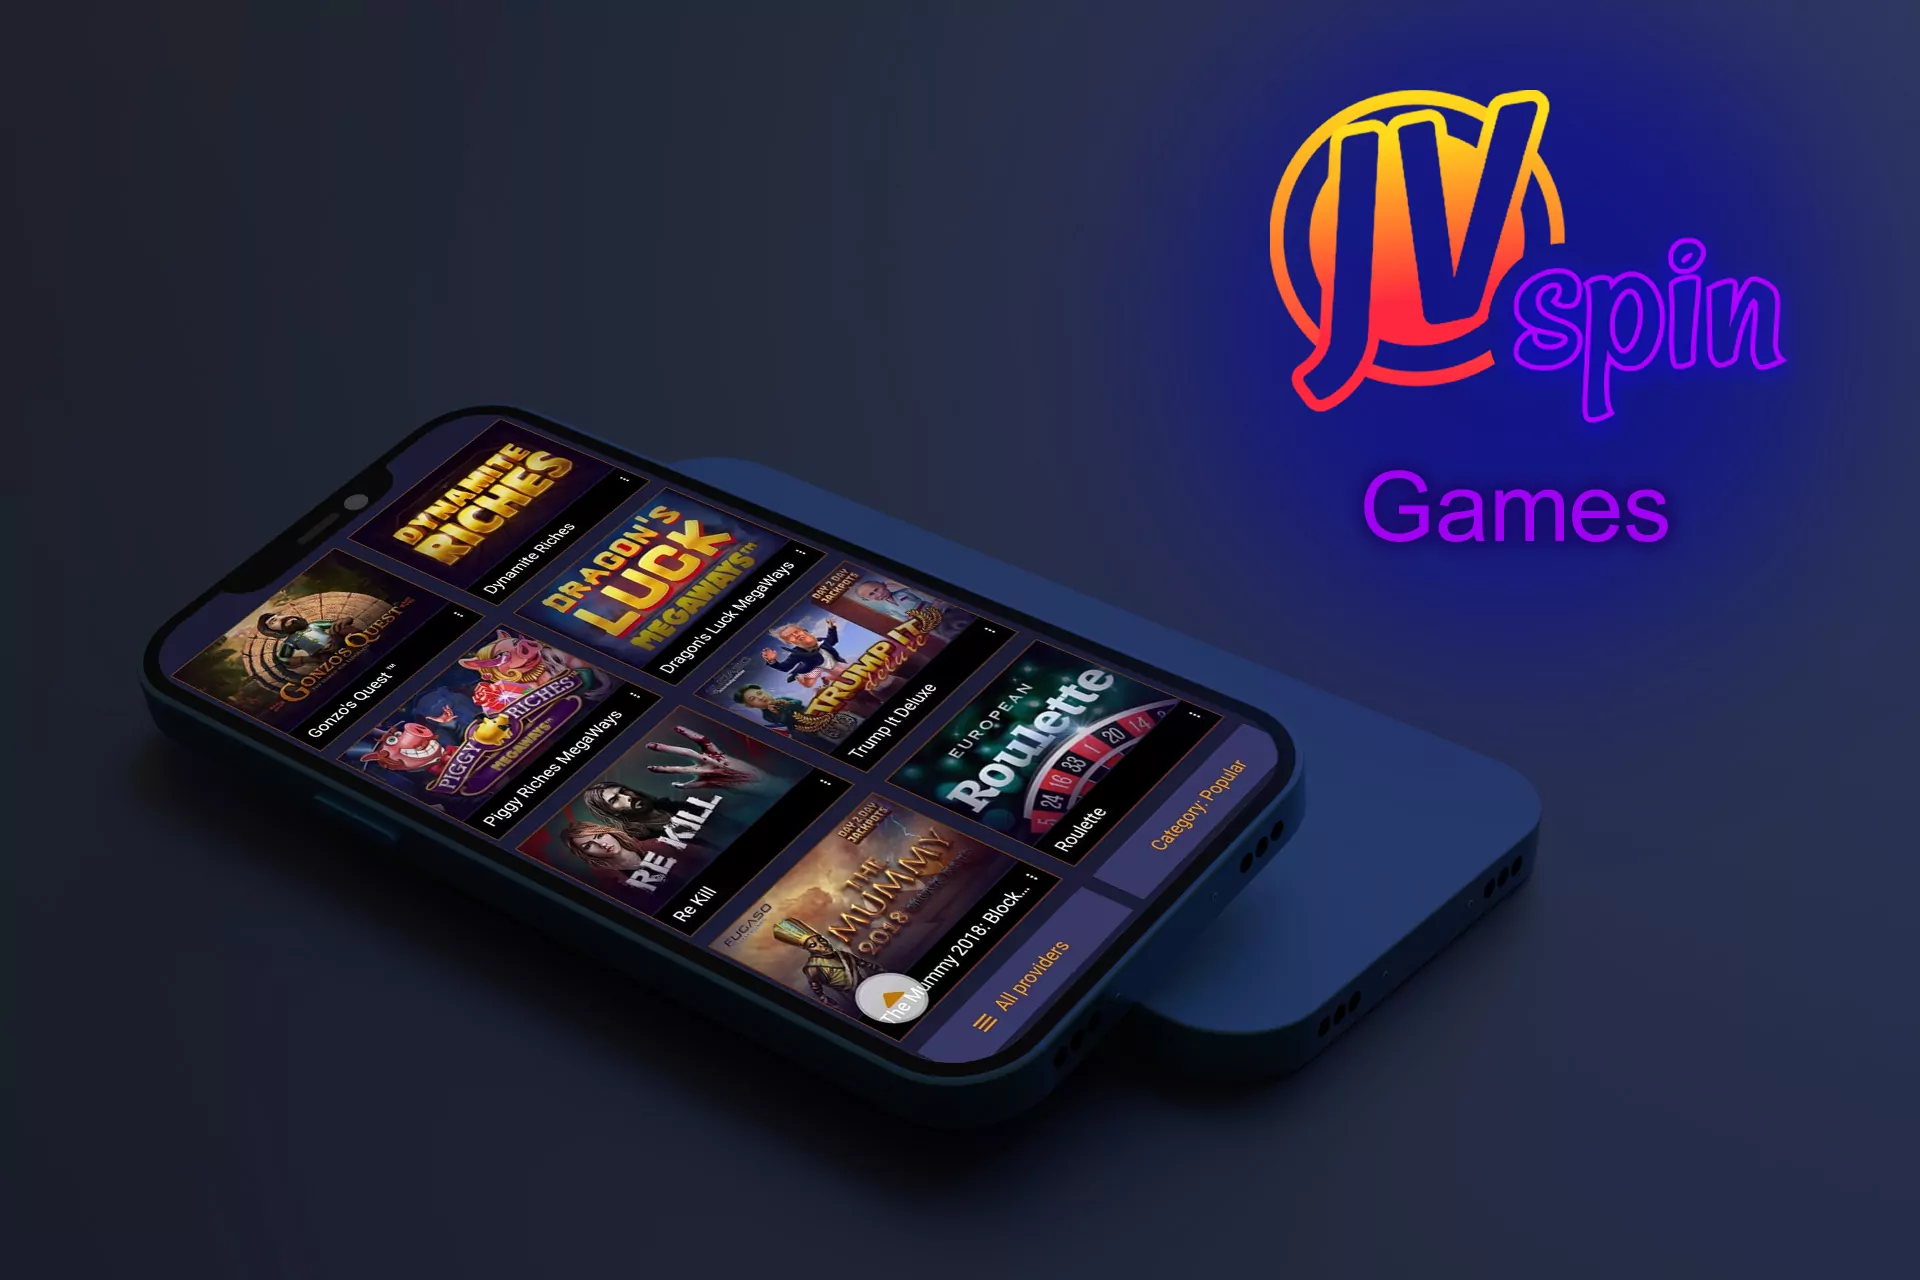 On the JVSpin Casino, you find lots of slots, mini-games, and games with live dealers.